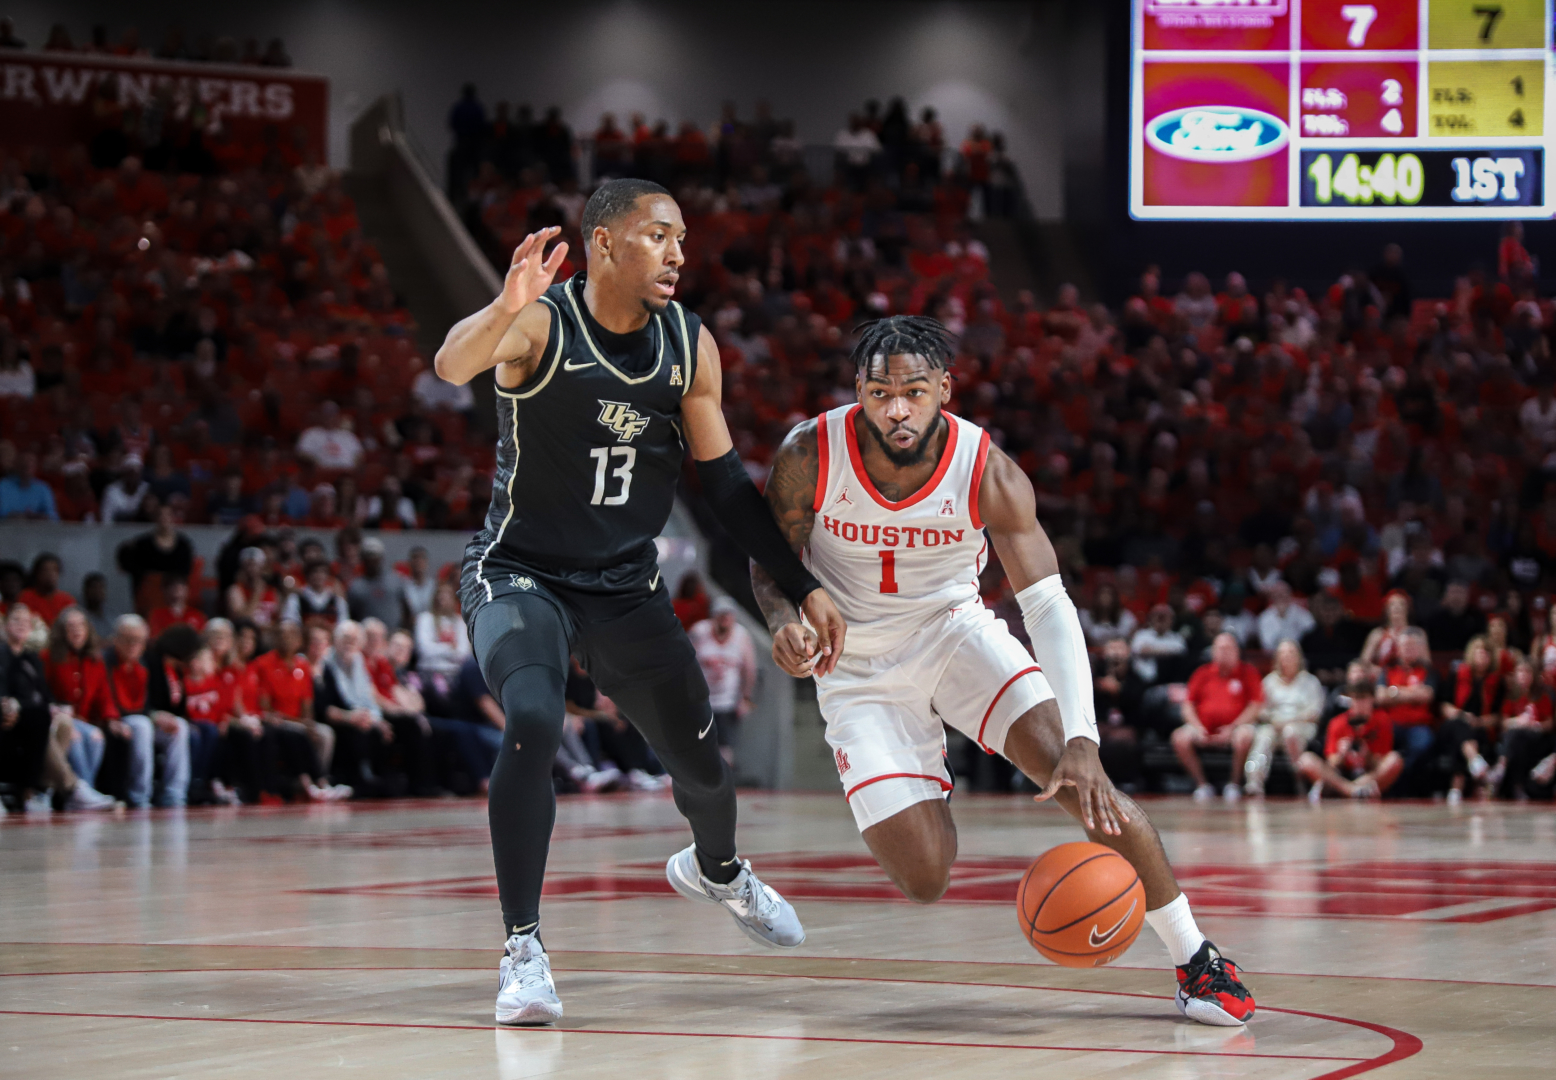 Jamal Shead, one of the leaders for No. 1 UH, believes the Cougars have another step they can take defensively to reach the next step on the ladder. | Anh Le/The Cougar